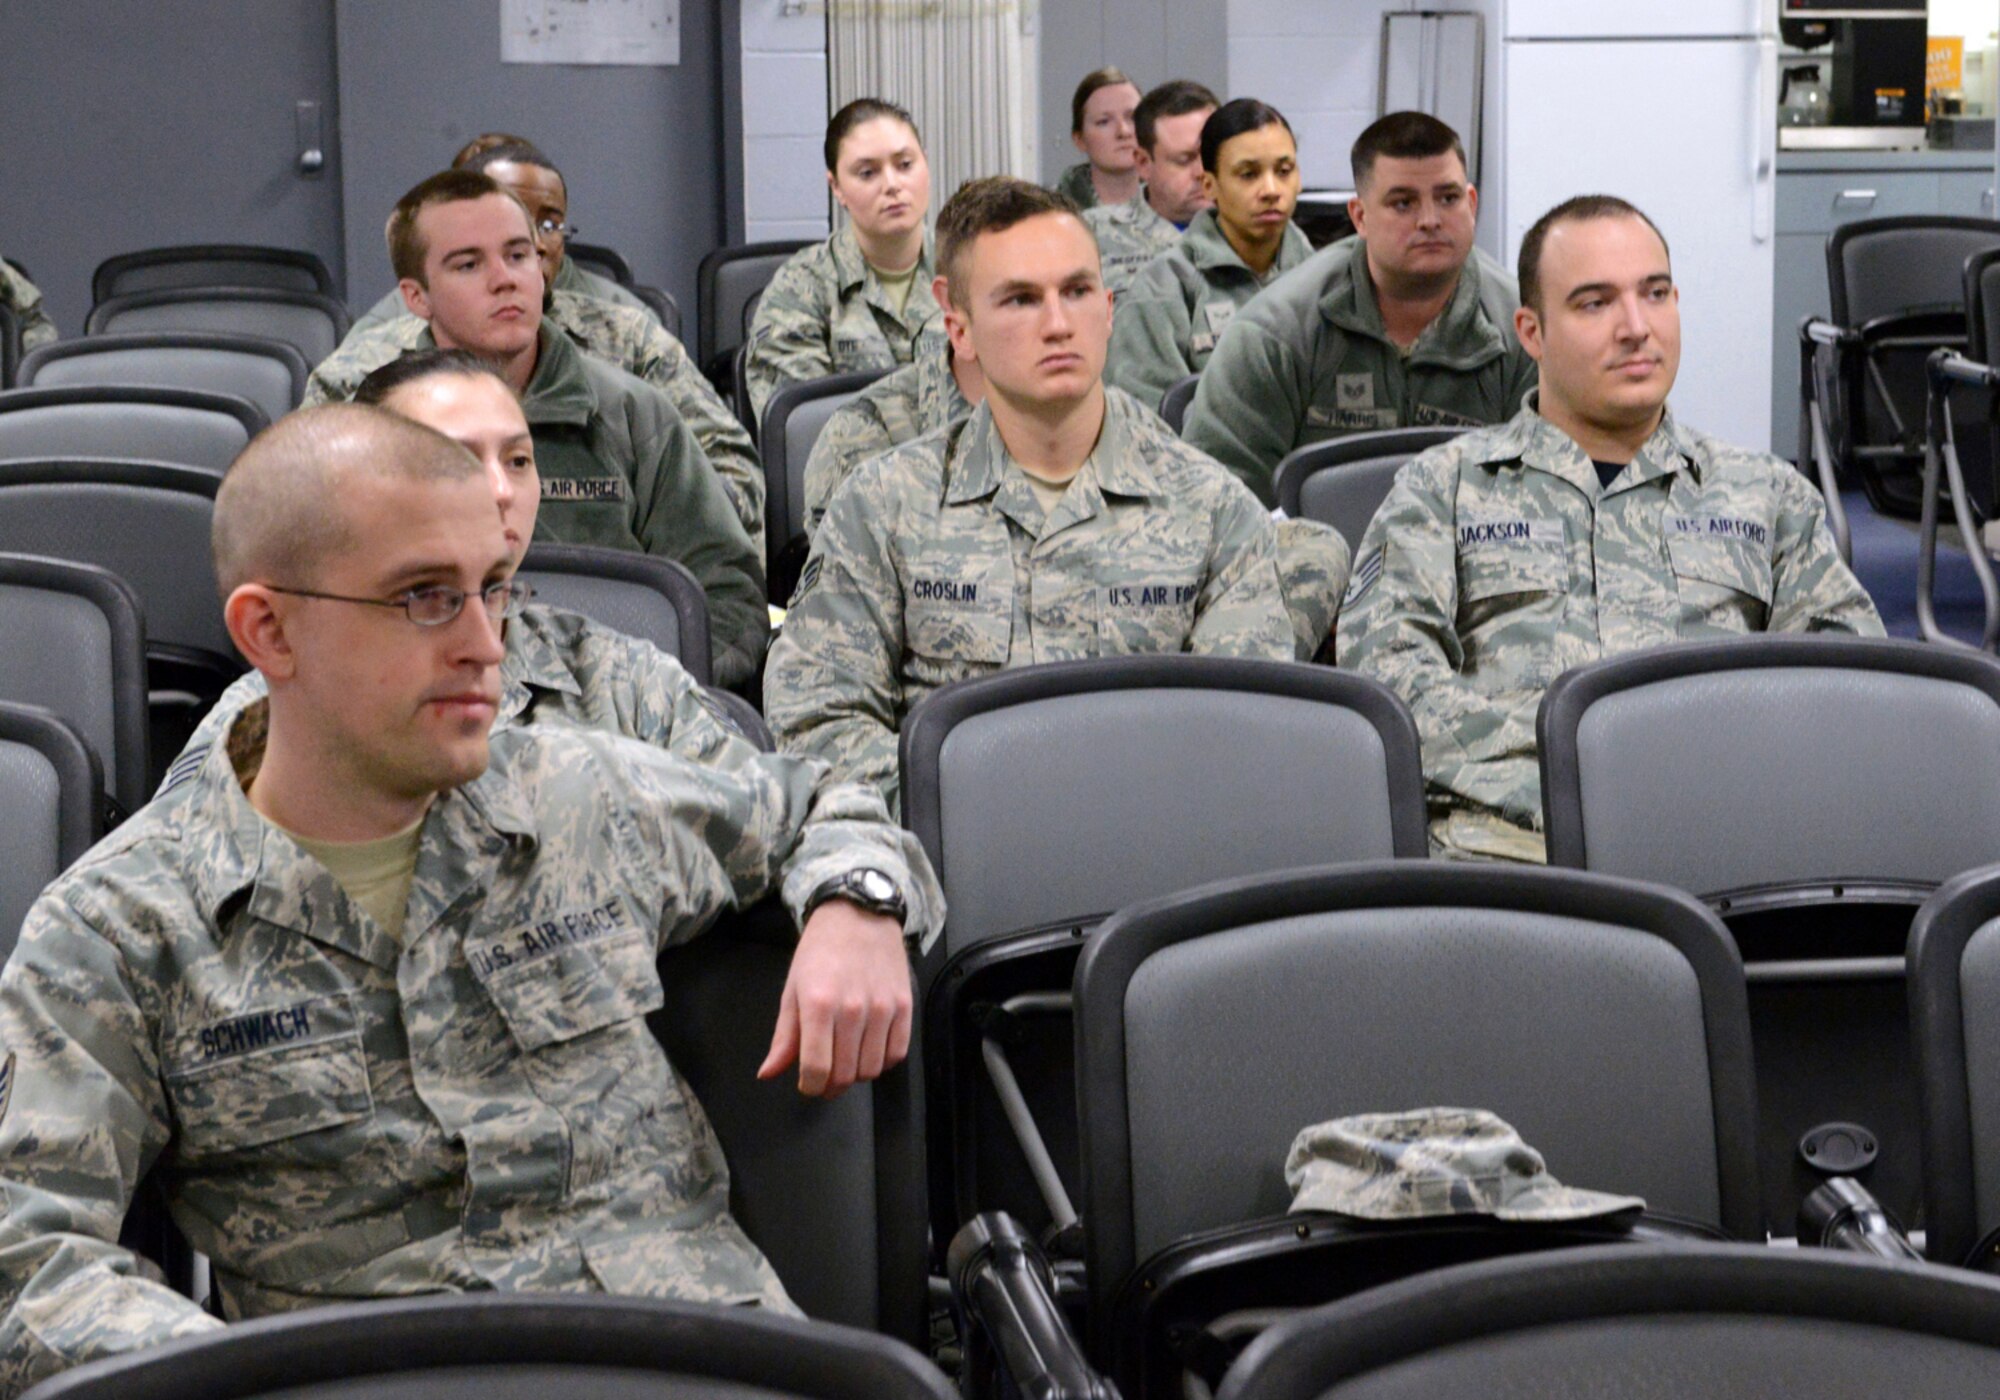 Members of the 138th Fighter Wing Oklahoma Air National Guard attend a "Rising 6" meeting on base March 8, 2015. The organization was recently reactivated by the senior non-commissioned officer’s council to help junior enlisted airmen to have a voice on base, and establish rapport and morale with other guard personnel. (U.S. National Guard photo by Tech. Sgt. Jeffery Foster/Released)